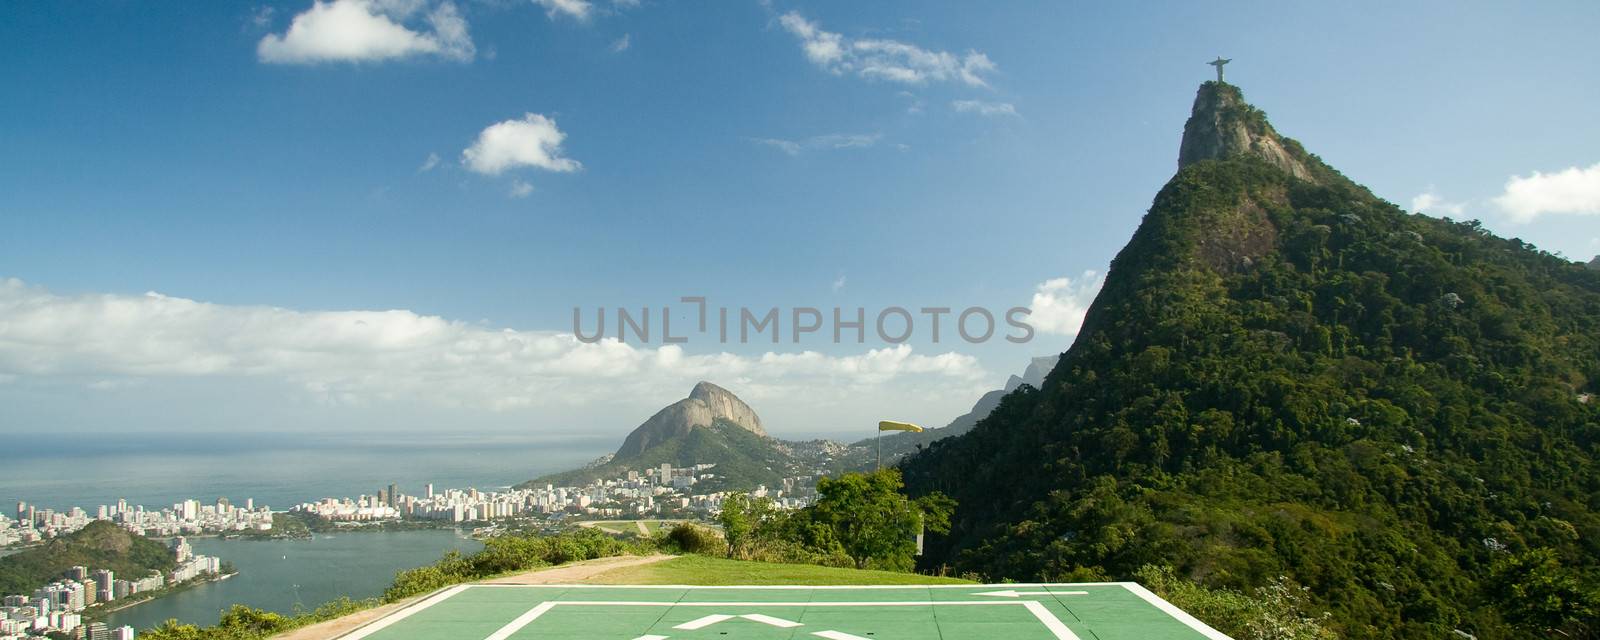 Distant view of Christ The Redeemer on top of the Corcovado Mountain, Rio De Janeiro, Brazil